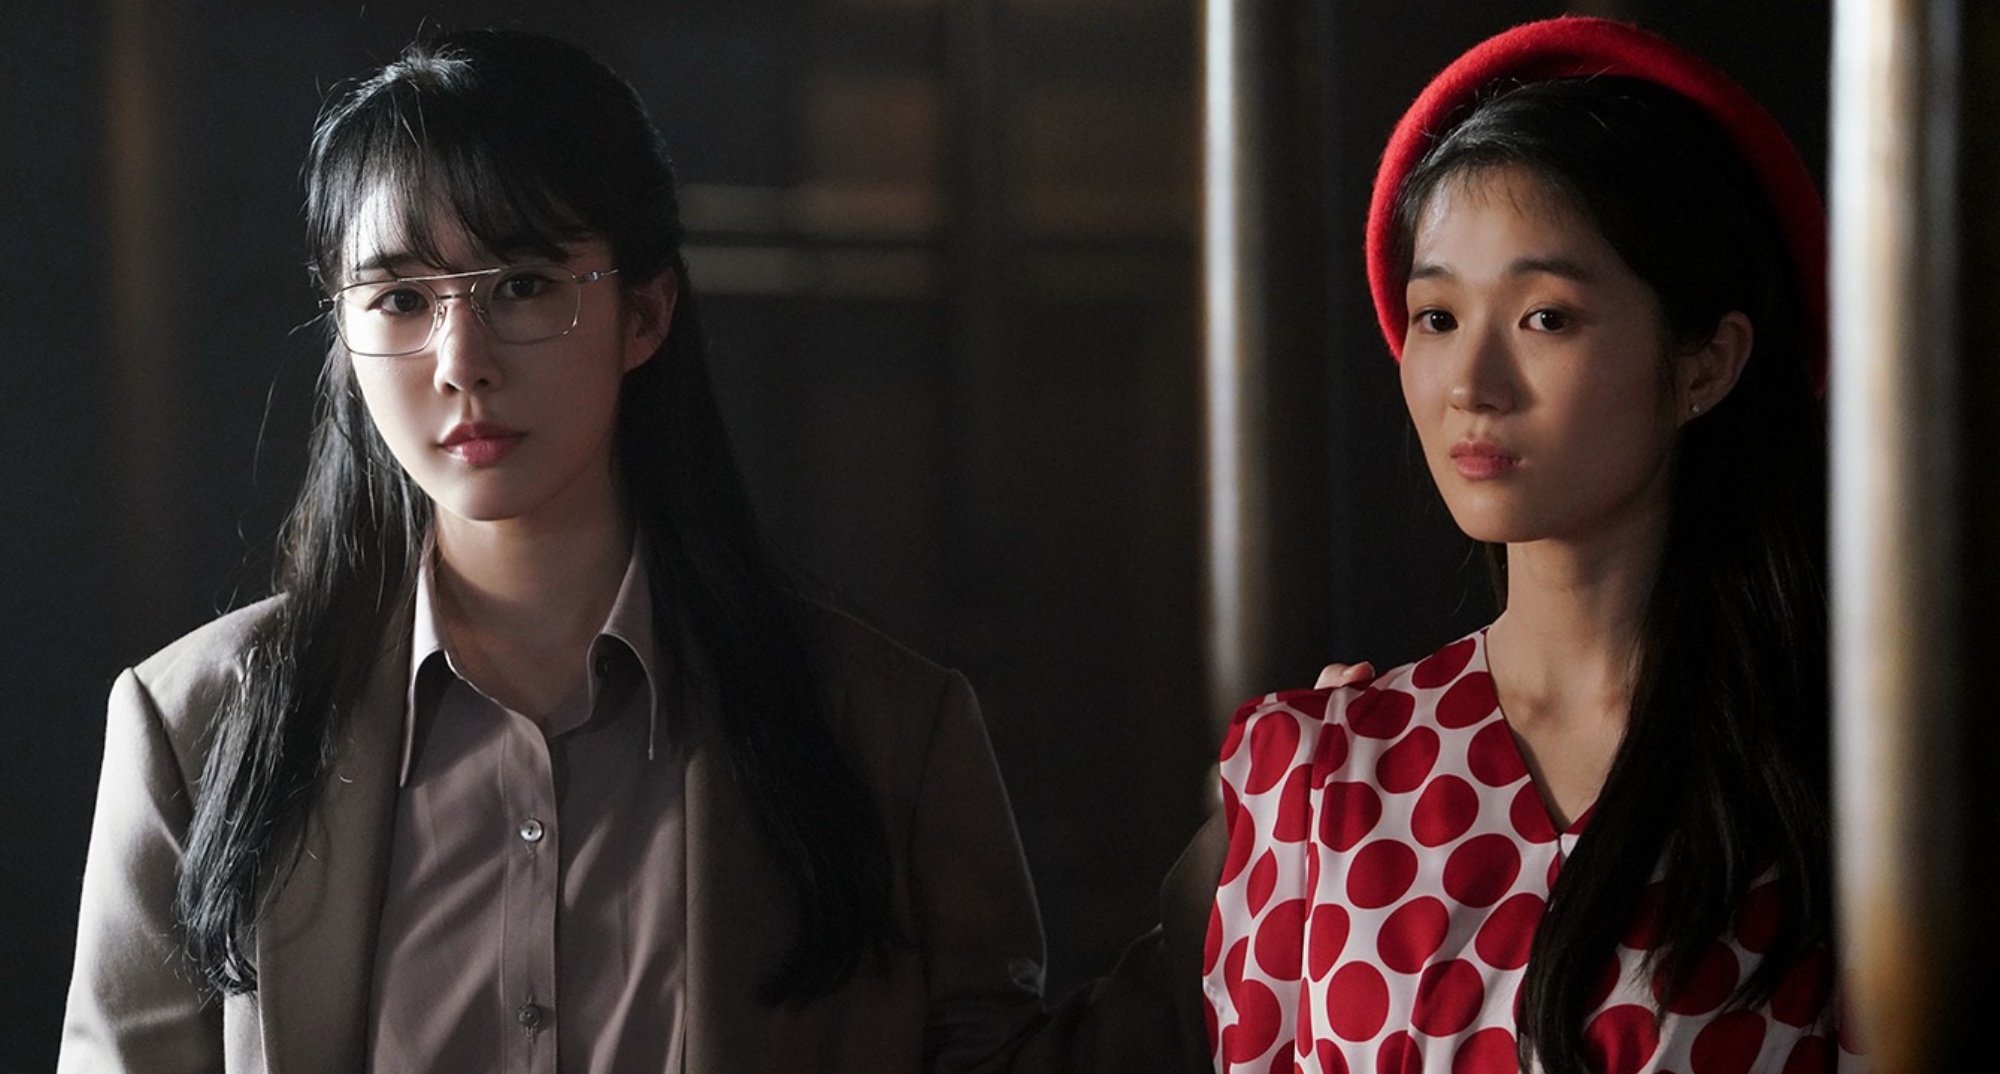 Cast members Yoo In-na and Kim Hye-yoon in 'Snowdrop' wearing suit and red polka dot dress.